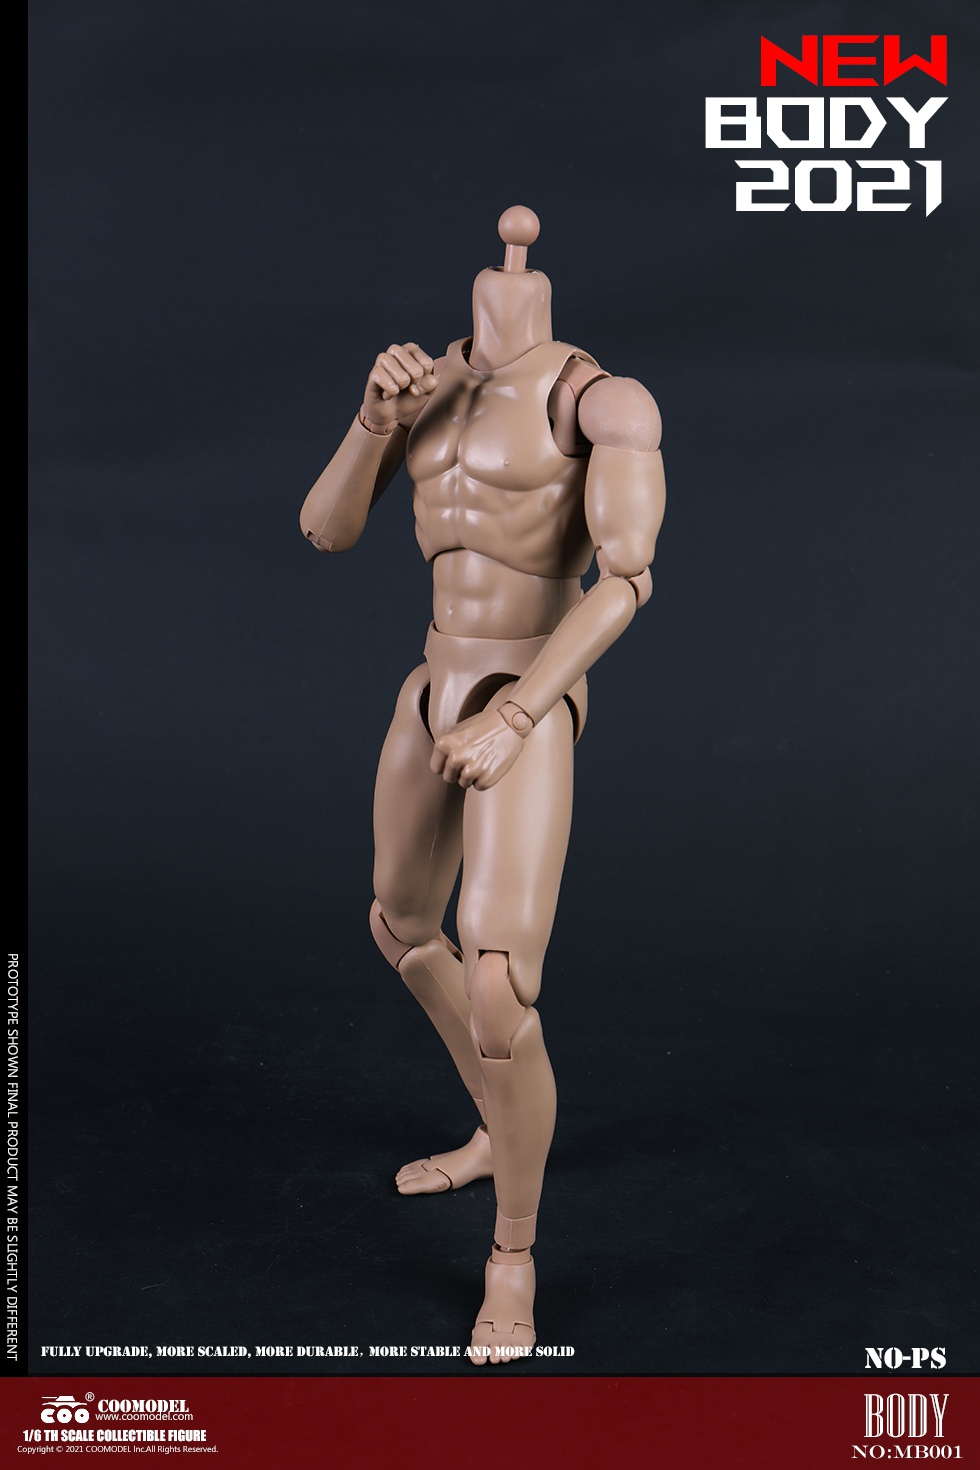 Body - NEW PRODUCT: COOMODEL: 1/6 MB001 standard male body, MB002 tall male body, MB003 muscle male body, MB004 tall muscle body 18090011